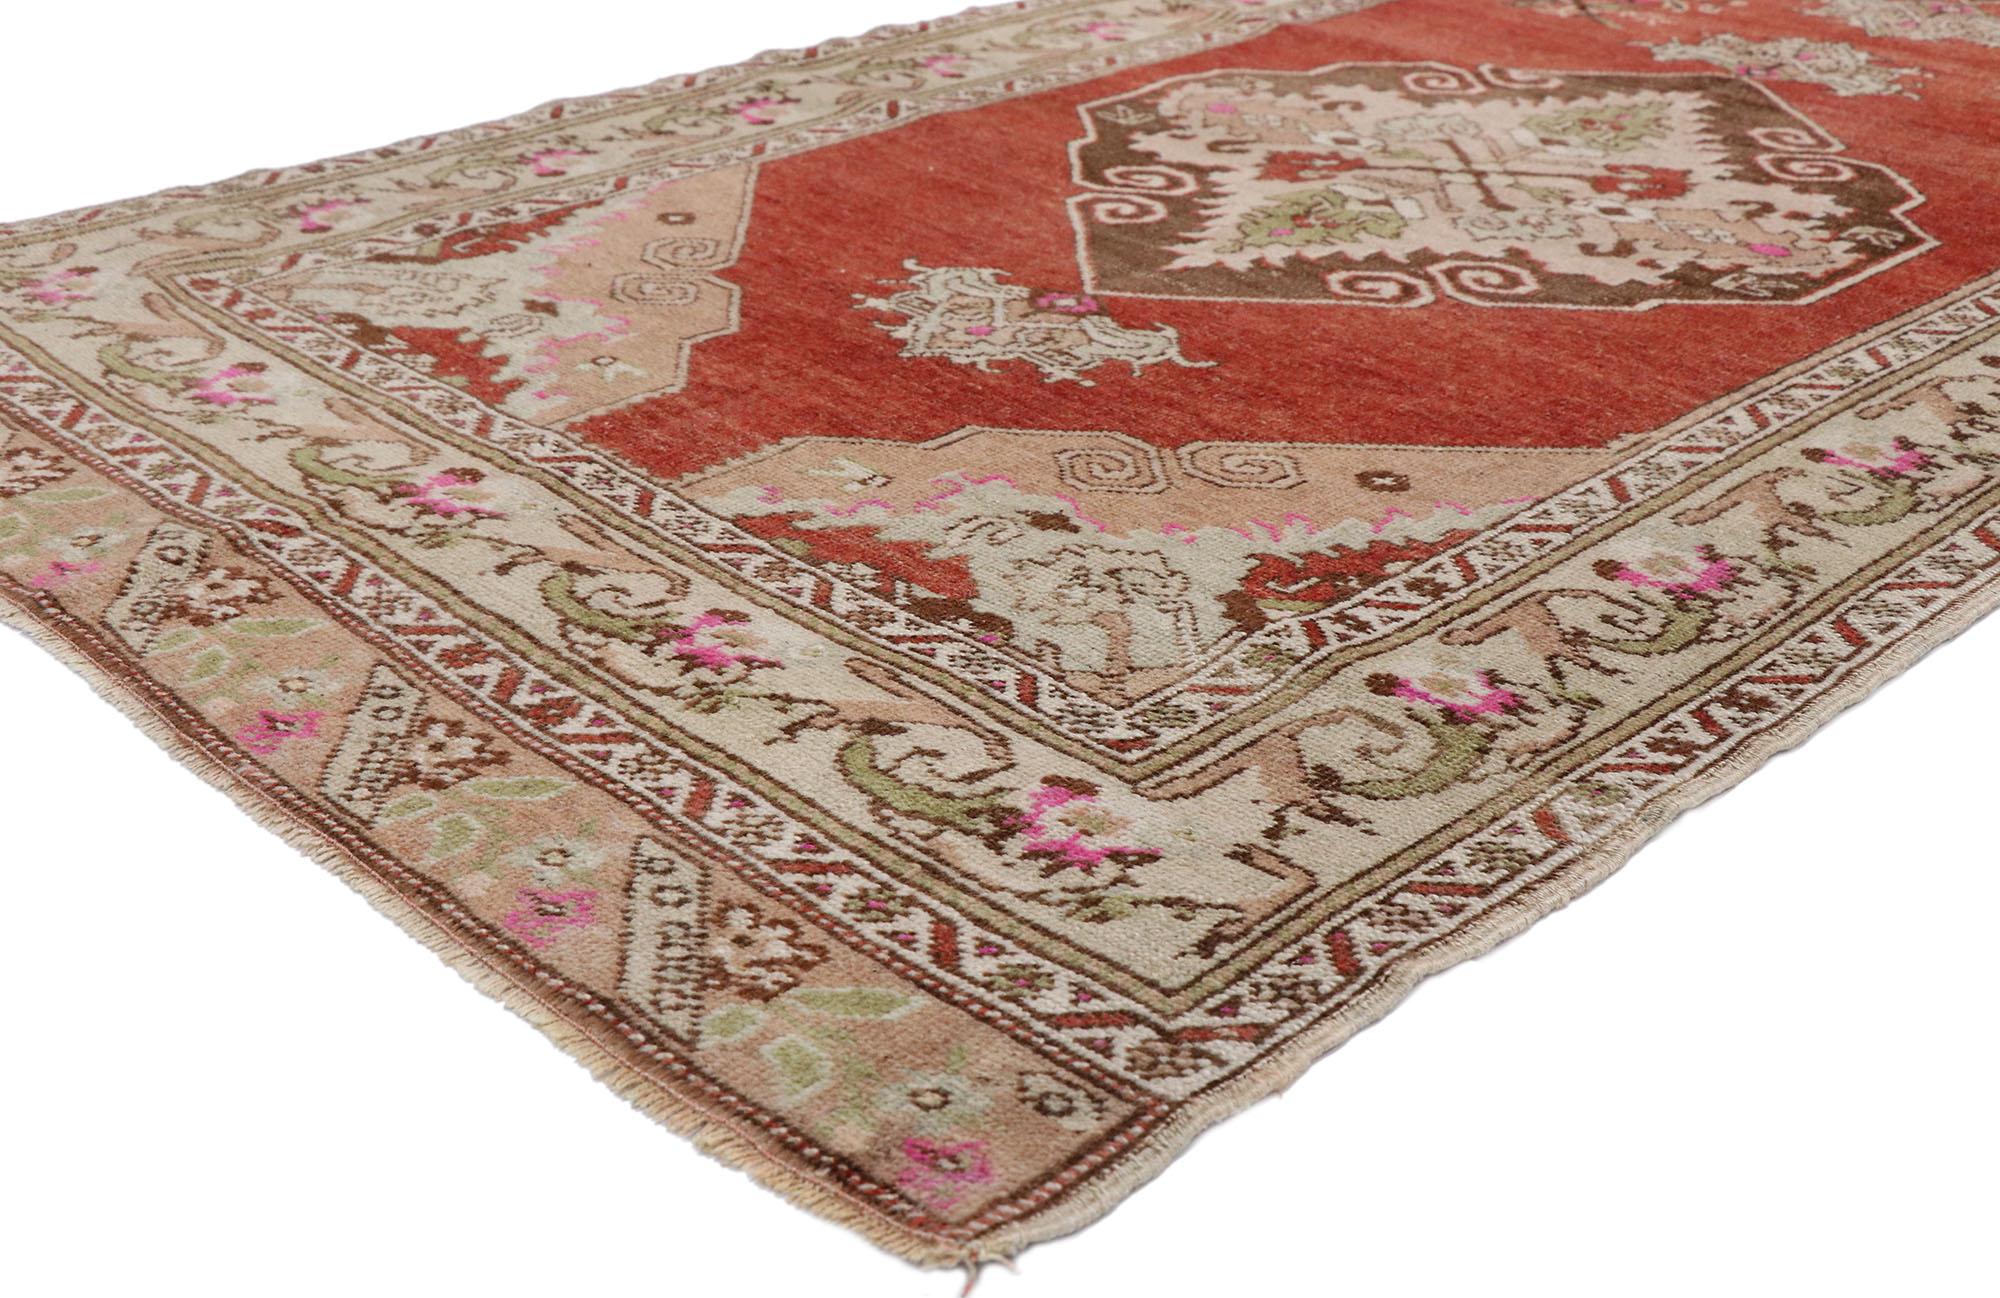 52758, vintage Turkish Oushak runner with Manor House Tudor style. With its warm, rich colors and ornate detailing, this hand knotted wool vintage Turkish Oushak runner is well-balanced and poised to impress. Three large scale medallions patterned